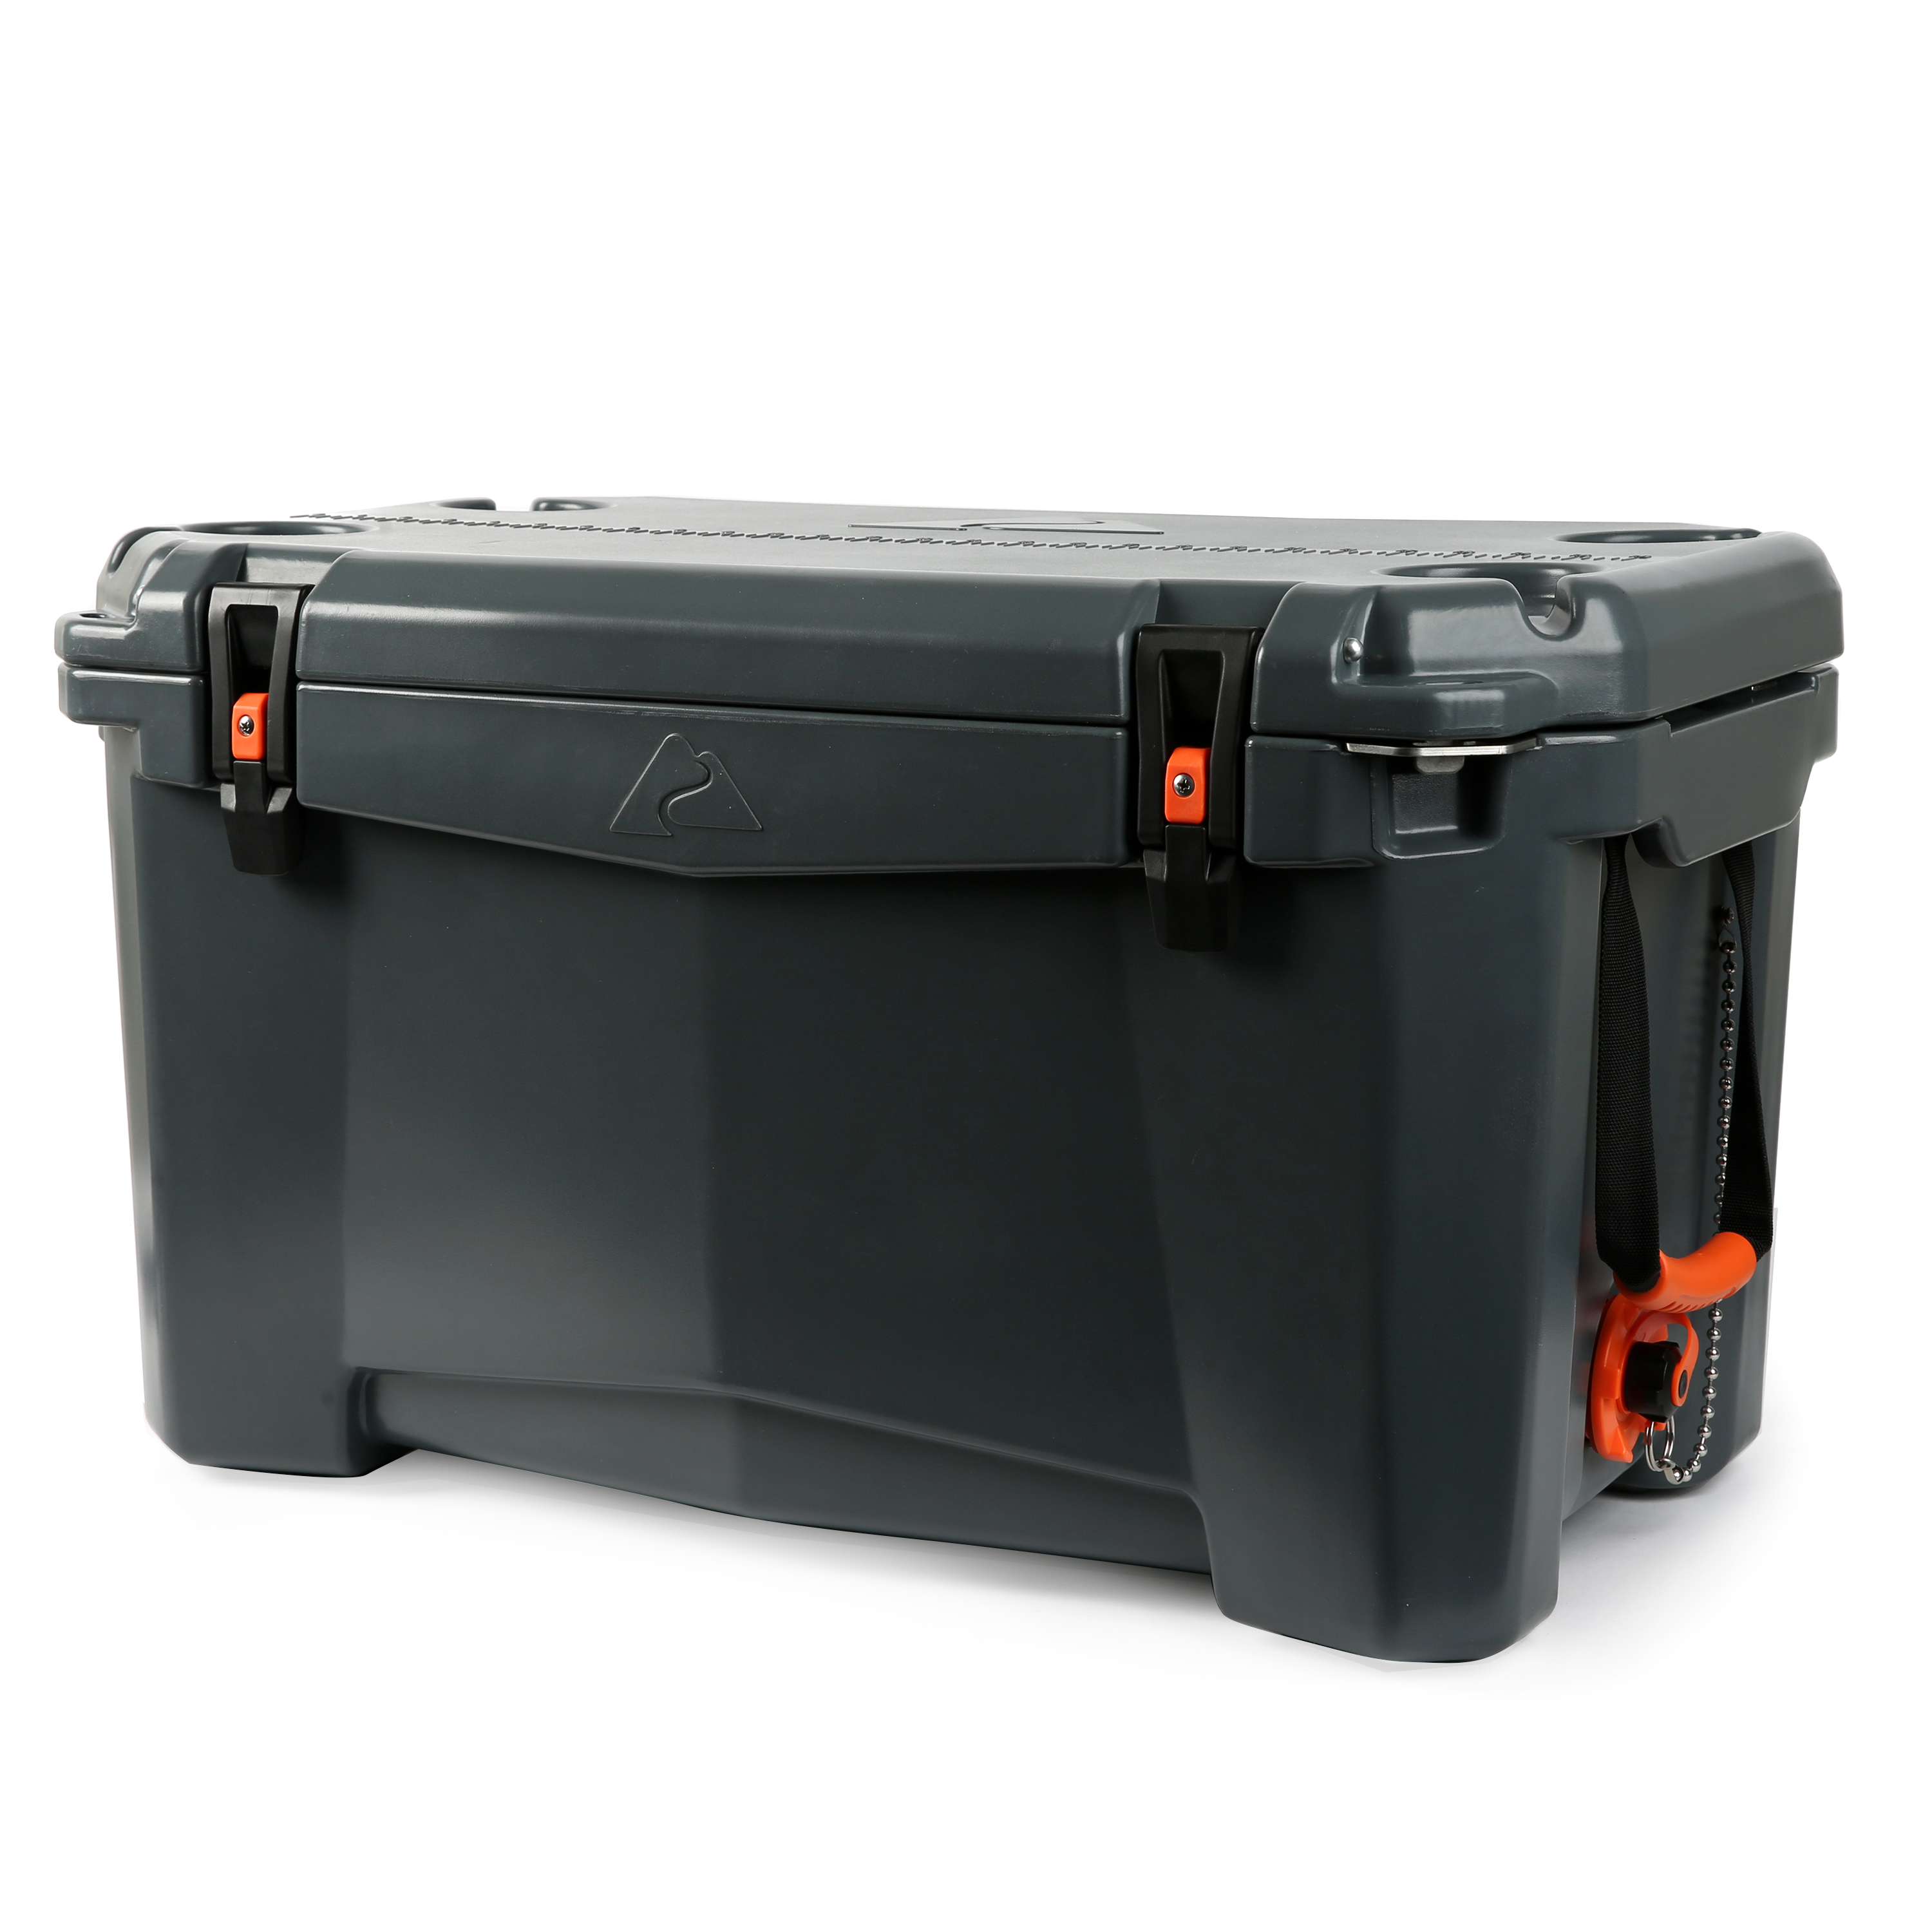 Ozark Trail 52 Quart High Performance Hard Sided Chest Cooler, Gray - image 5 of 11